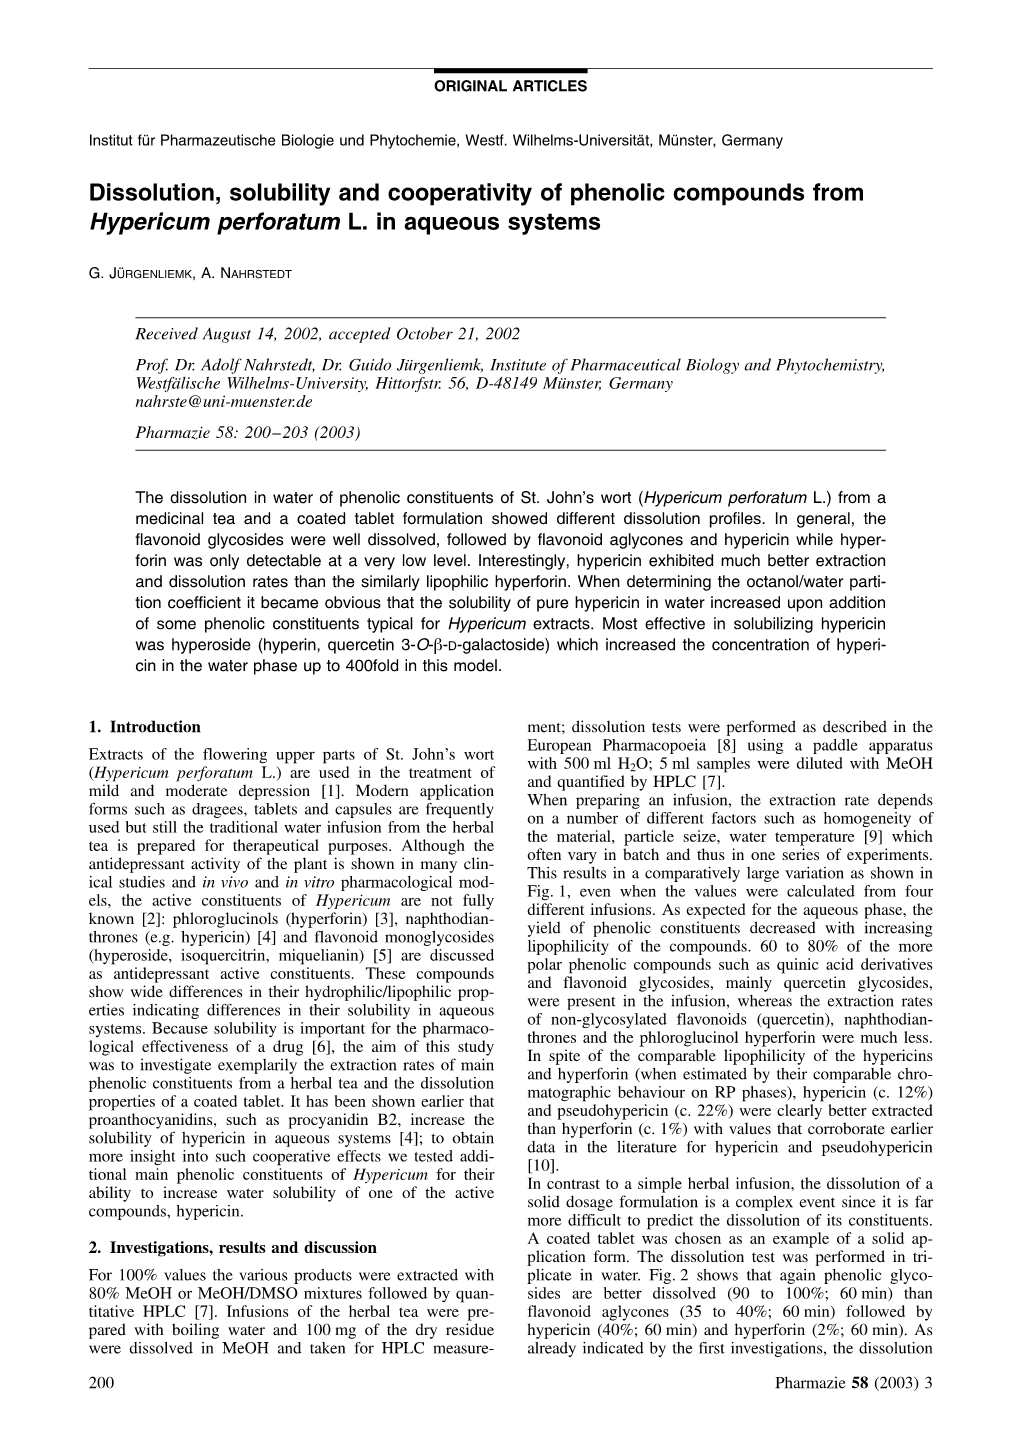 Dissolution, Solubility and Cooperativity of Phenolic Compounds from Hypericum Perforatum L